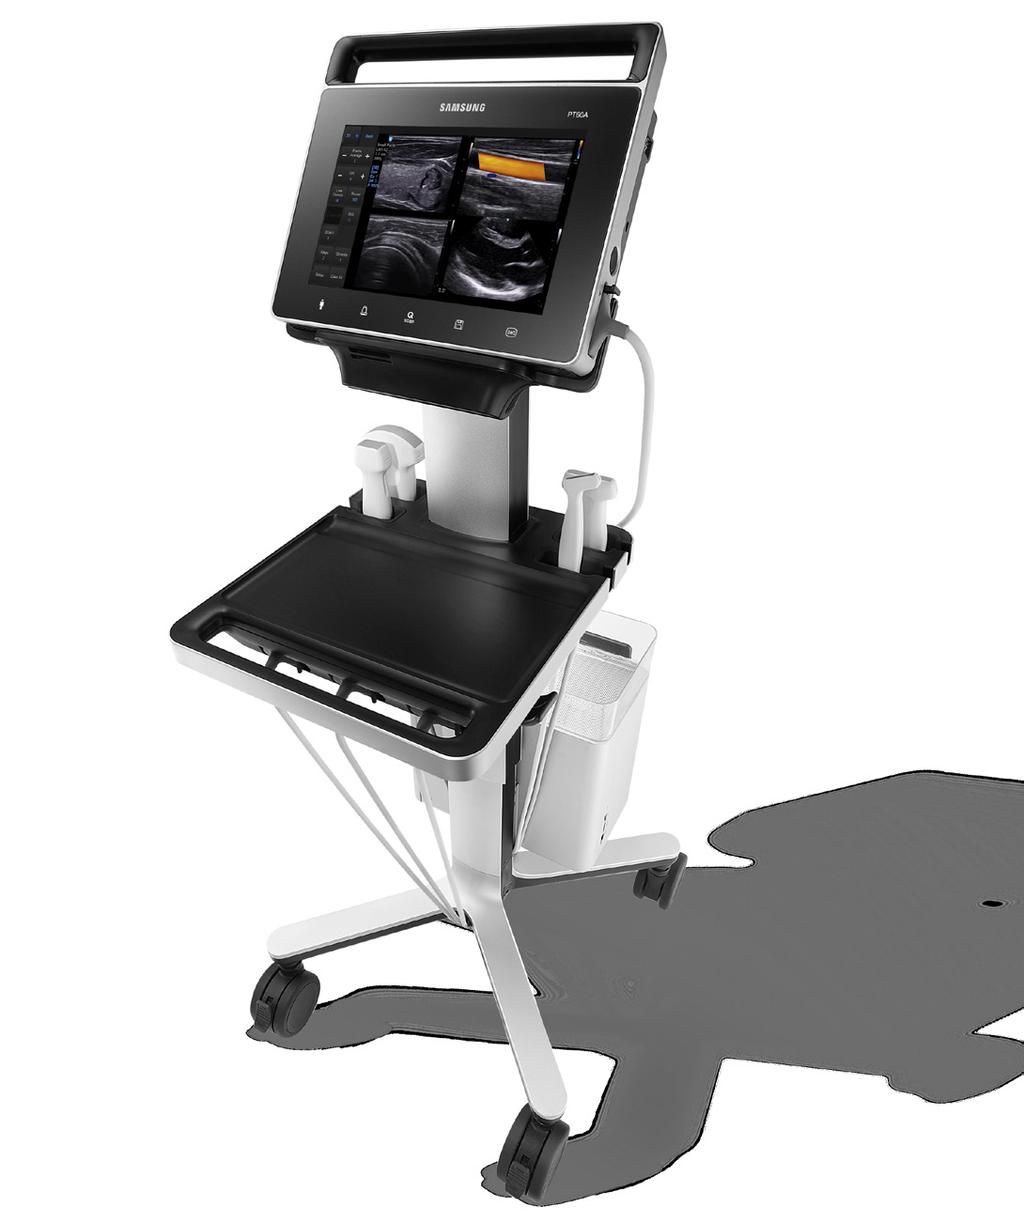 This compact-sized ultrasound system is engineered to meet the needs of the portable market and